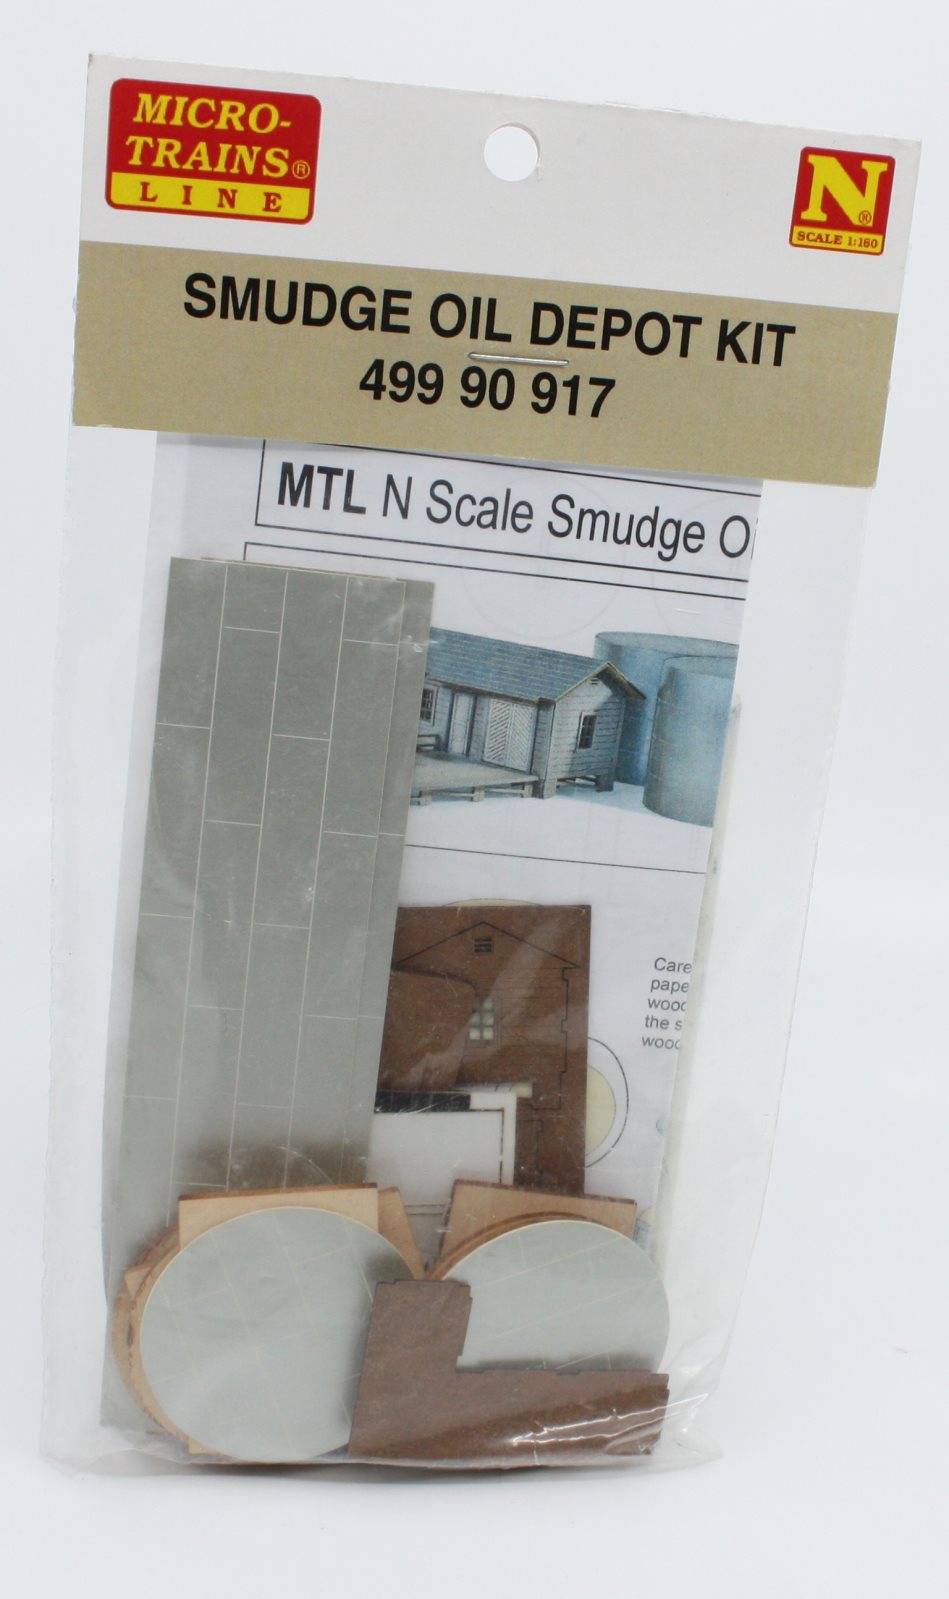 Micro-Trains 49990917 N Smudge Oil Deopt Kit